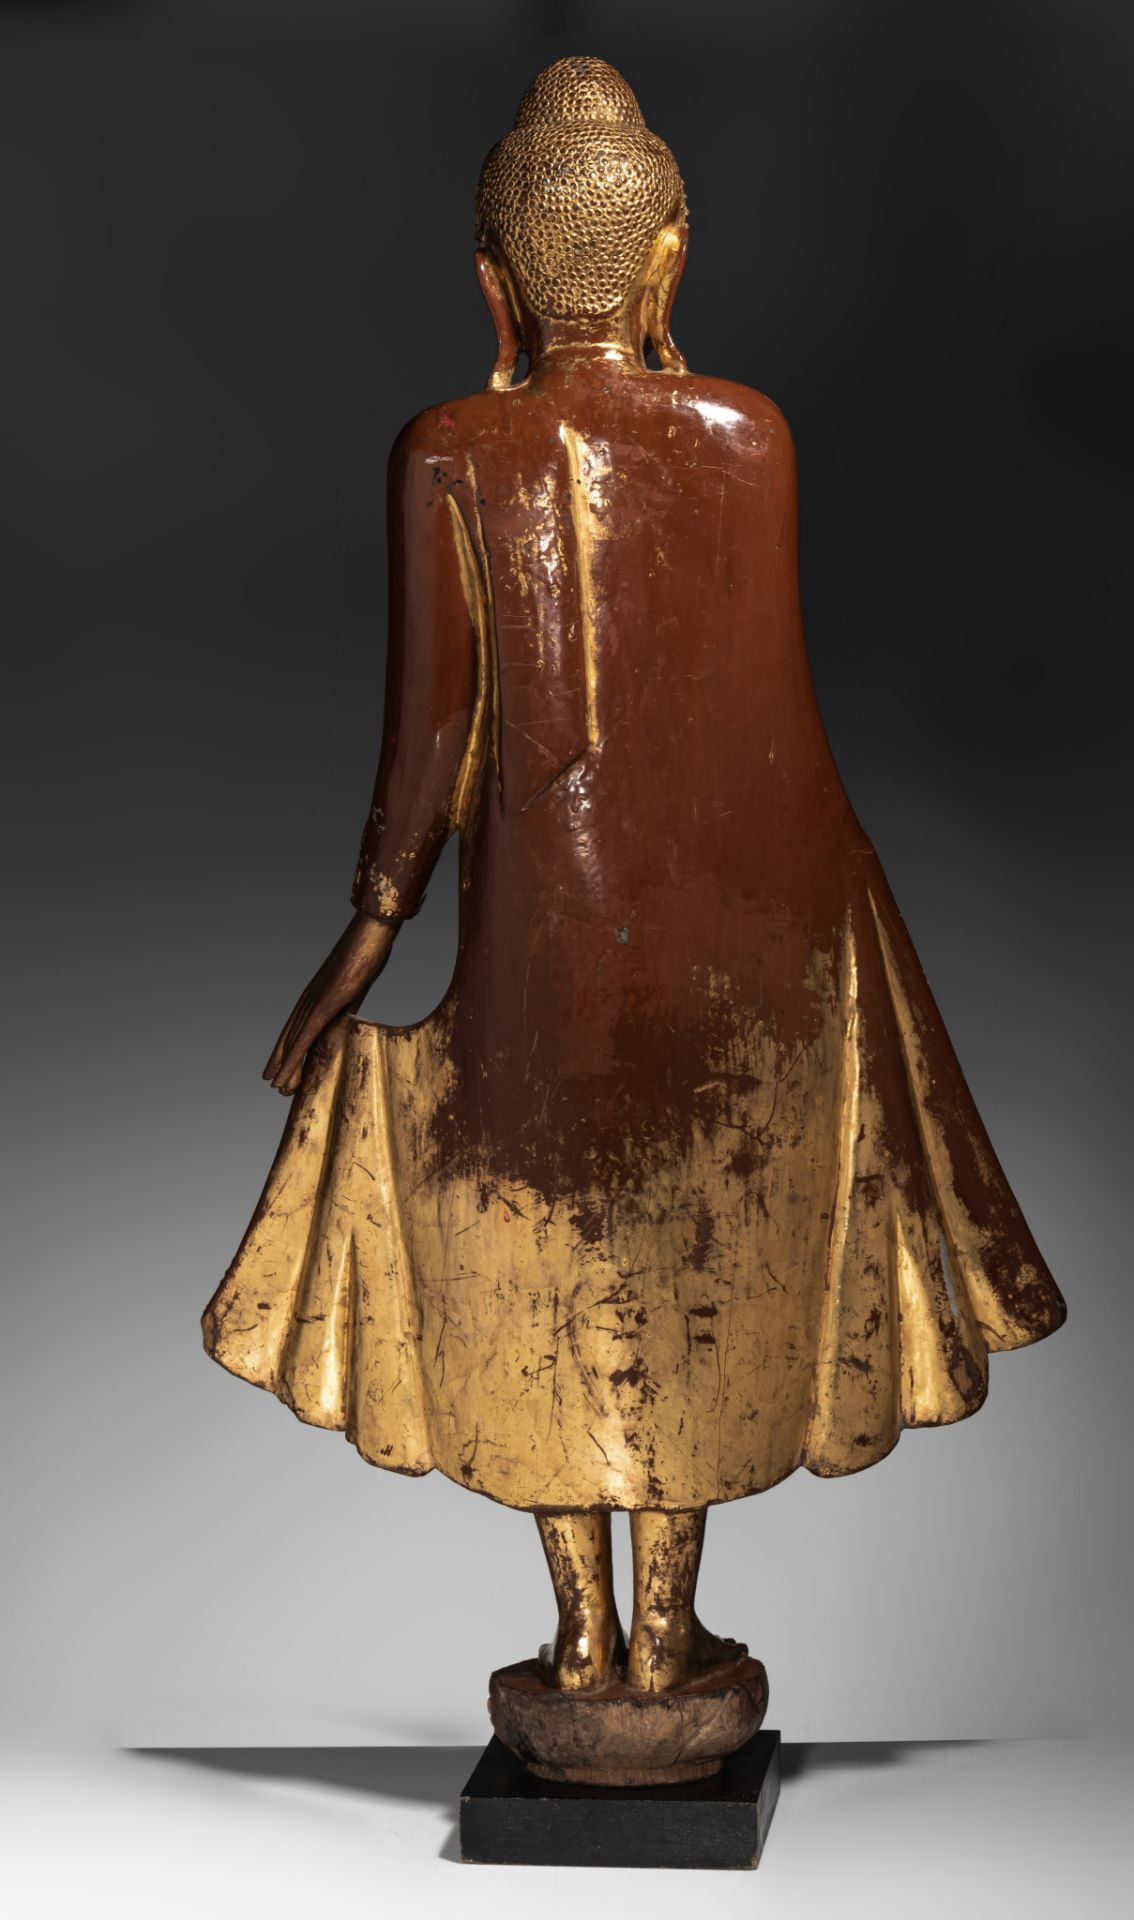 A Burmese gilt lacquered wooden figure of standing Buddha, inlaid with glass beads, 19thC, H 103,5 c - Bild 4 aus 5